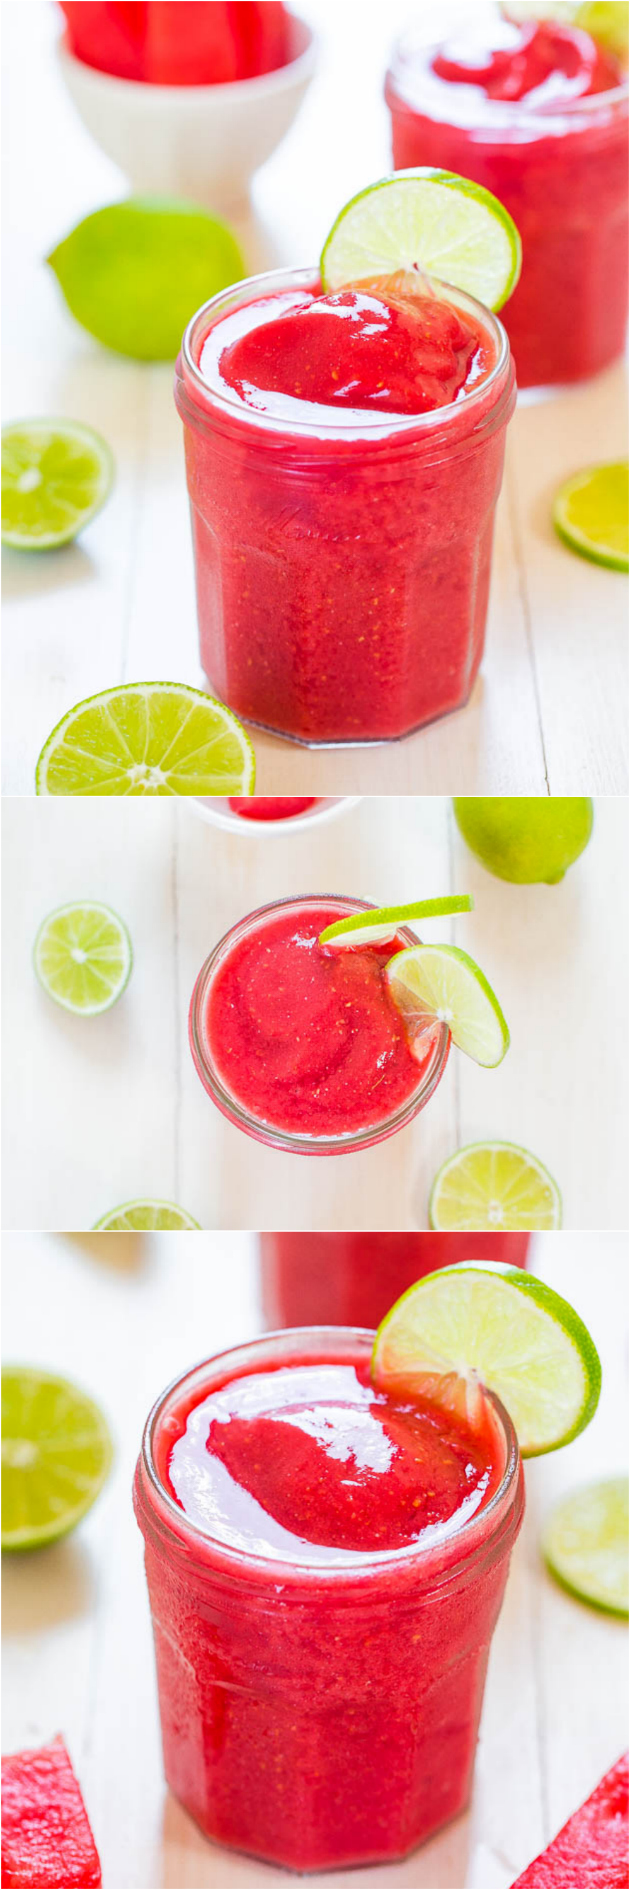 Watermelon Vodka Slush — These alcoholic slushies are summertime in a glass! Cool, refreshing, and you'll want a refill before you know it!